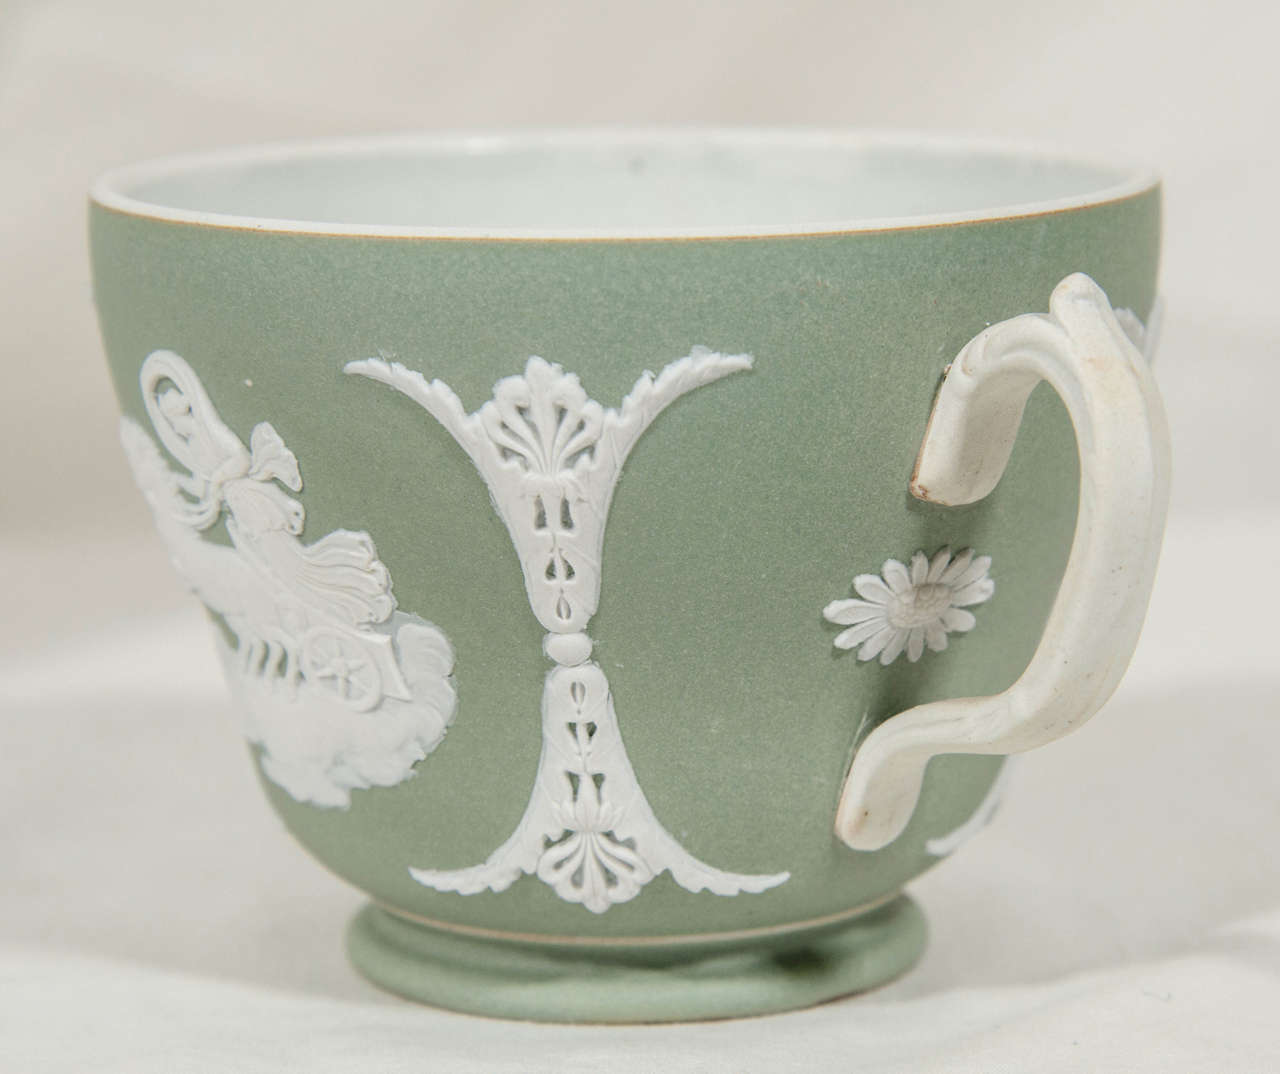 19th Century Antique Wedgwood Jasperware Tea Cup and Saucer